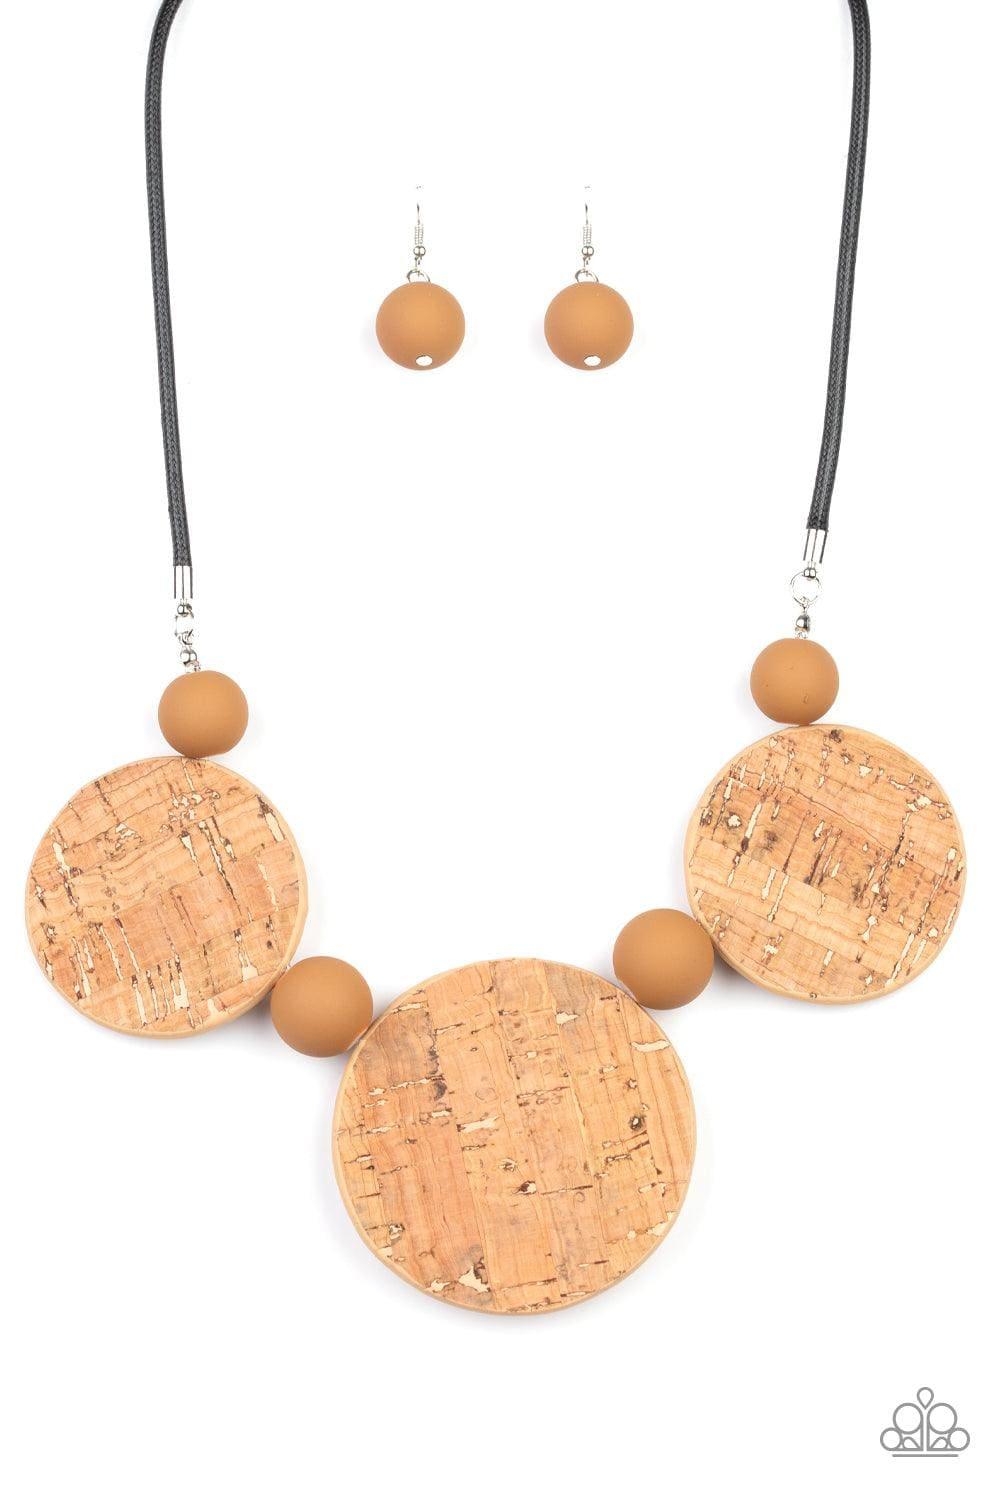 Paparazzi Accessories - Pop The Cork - Brown Necklace - Bling by JessieK